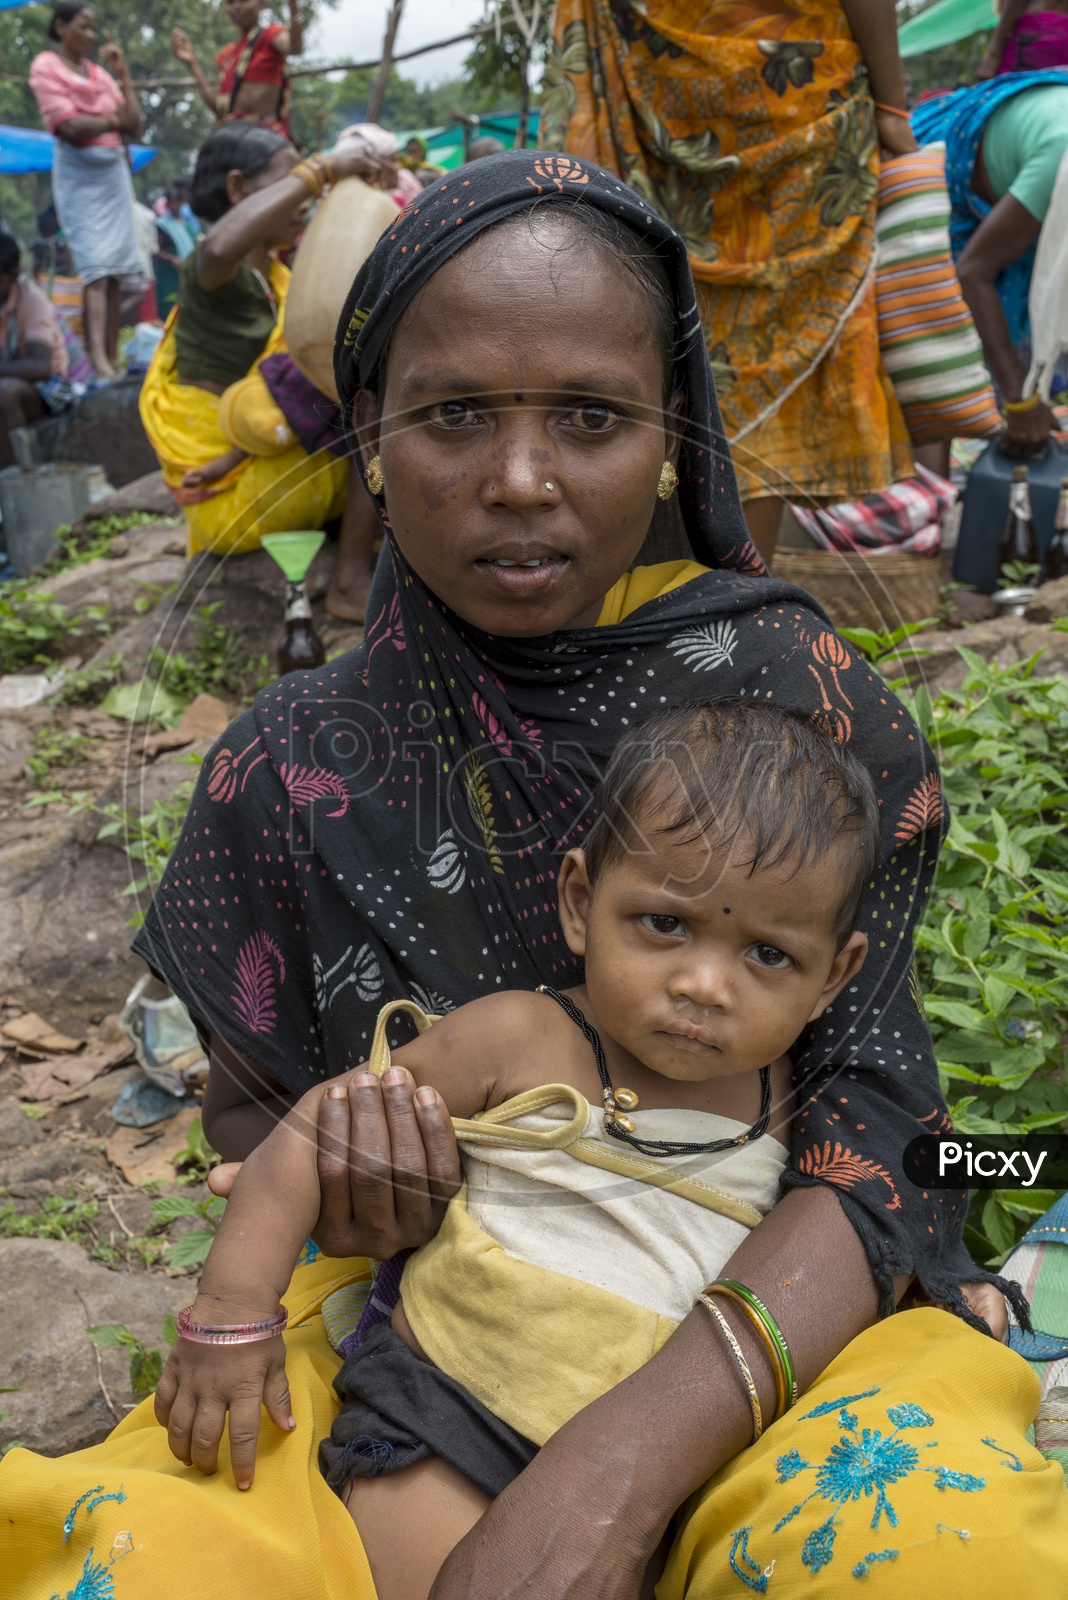 Woman with her kid in Haat Market